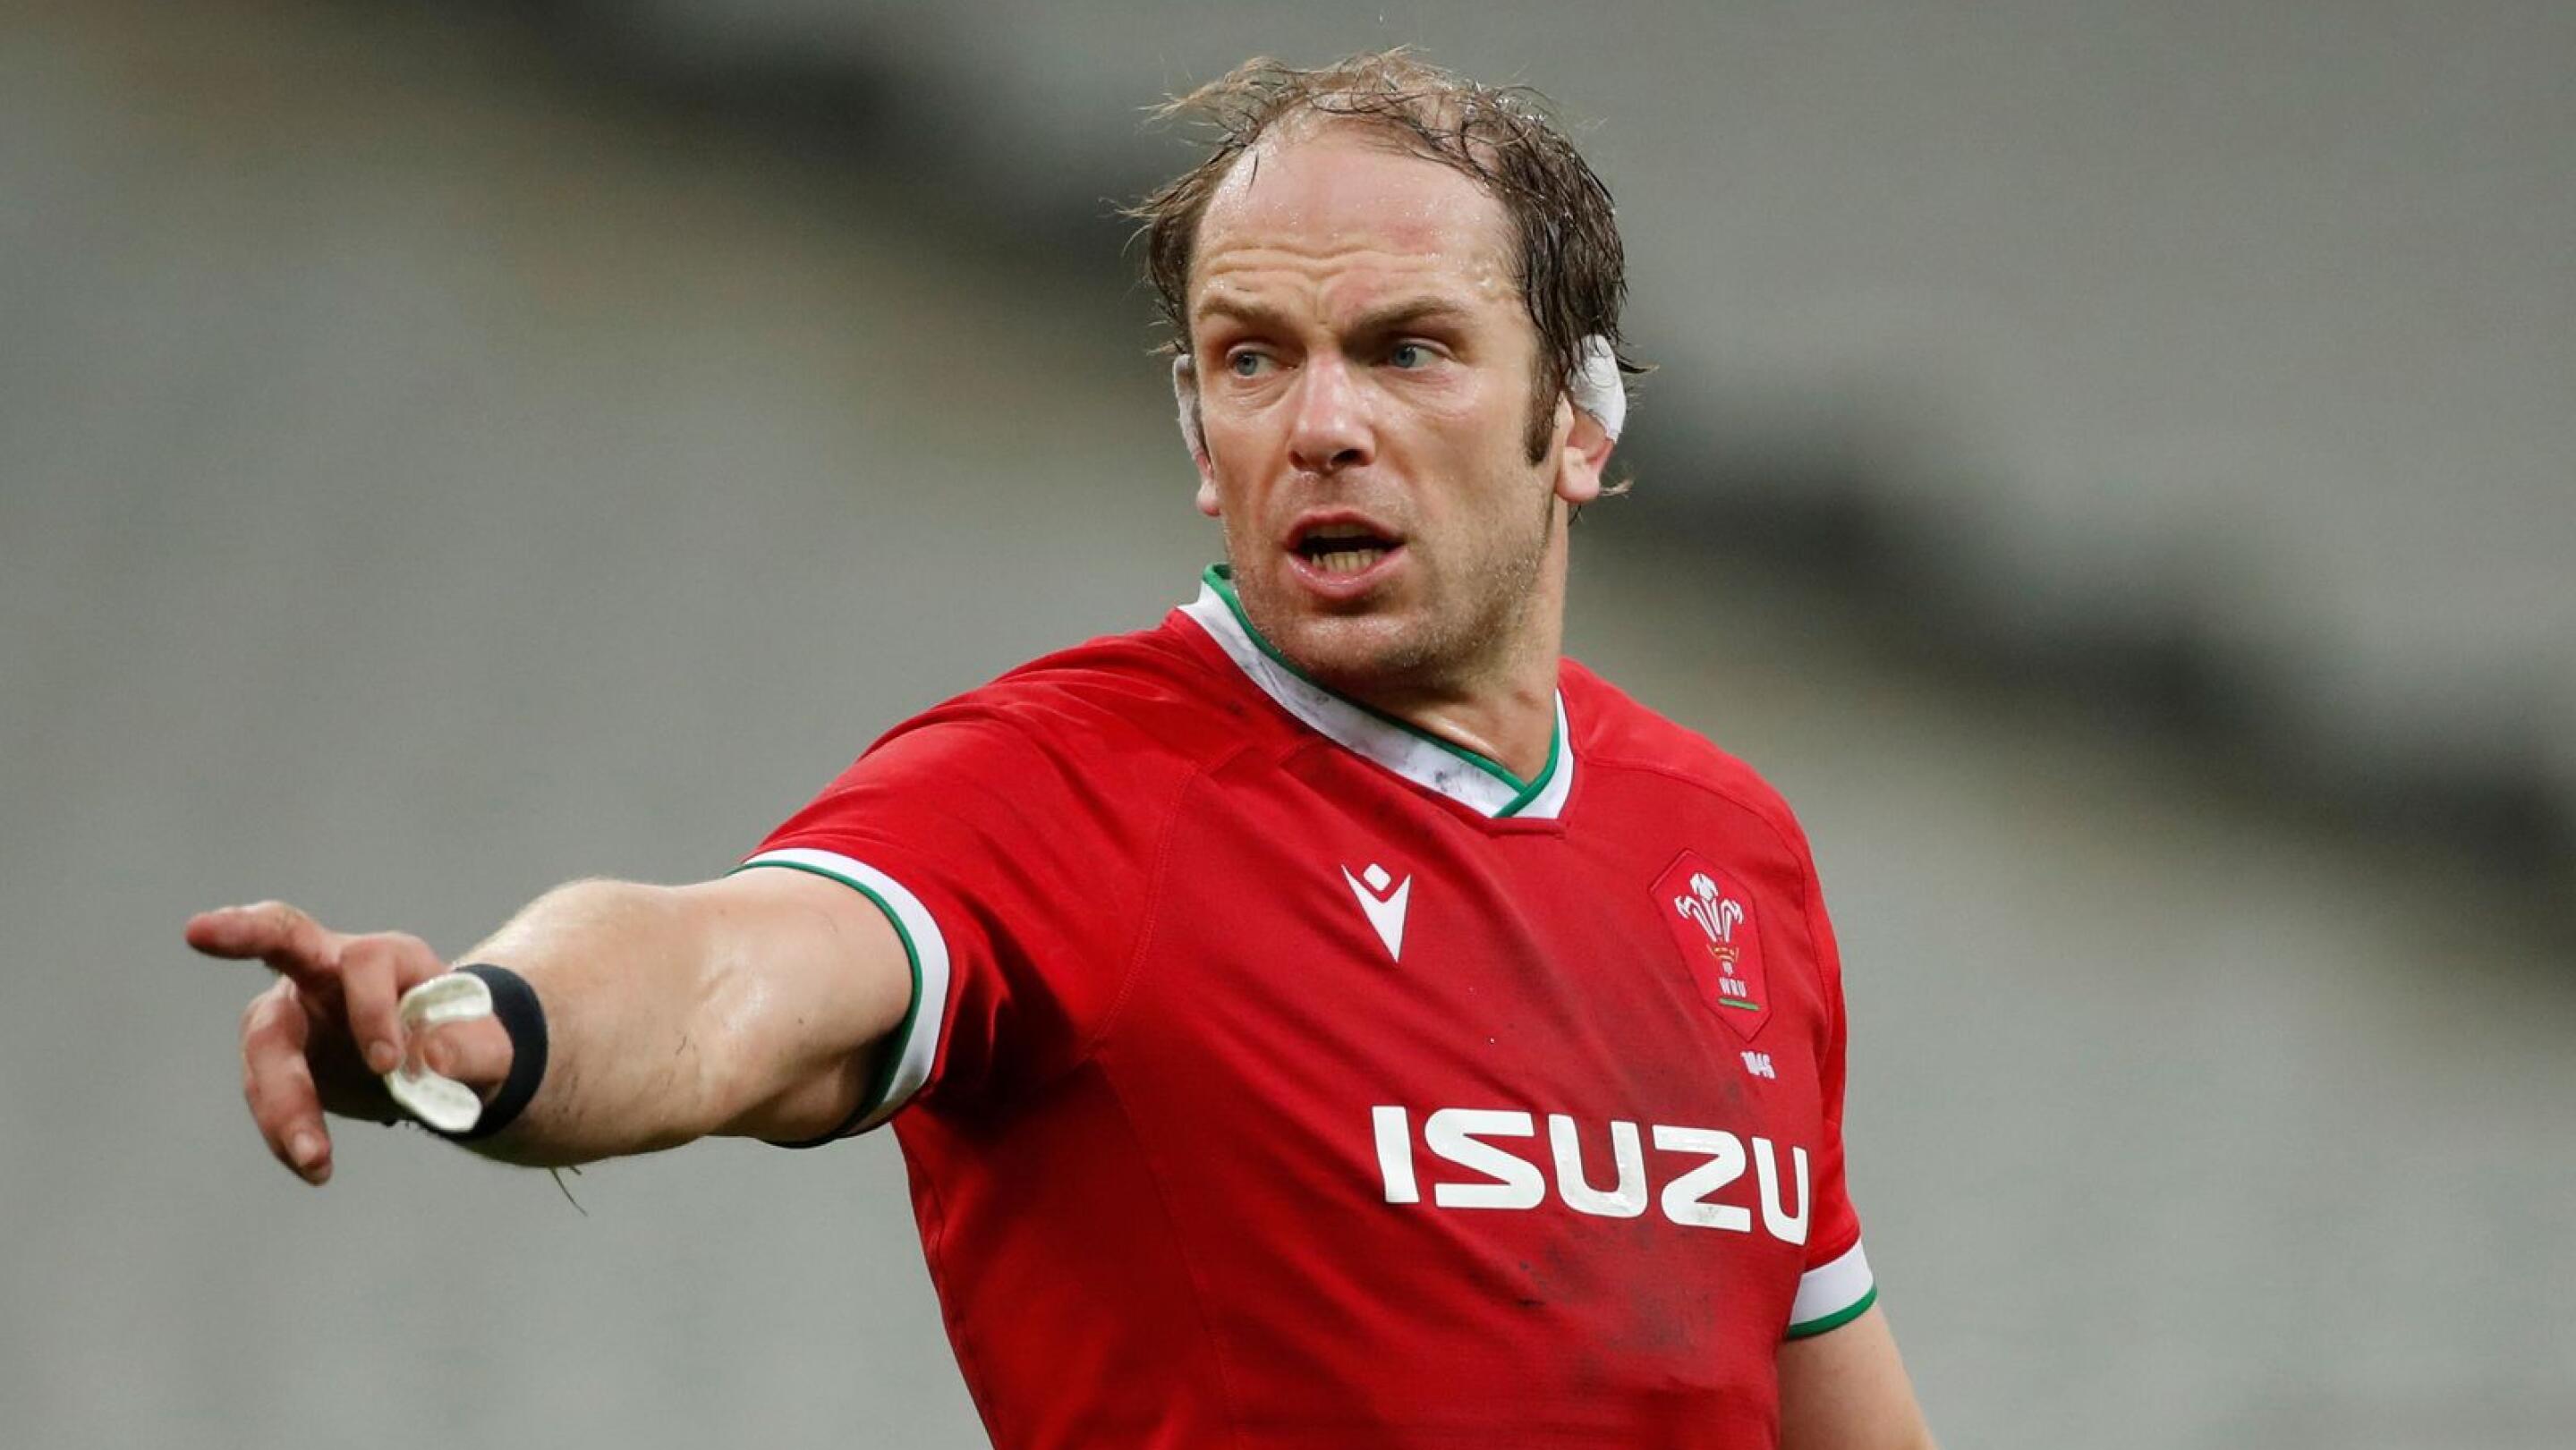 Injured British and Irish Lions captain Alun Wyn Jones could rejoin the side this week, says coach Warren Gatland